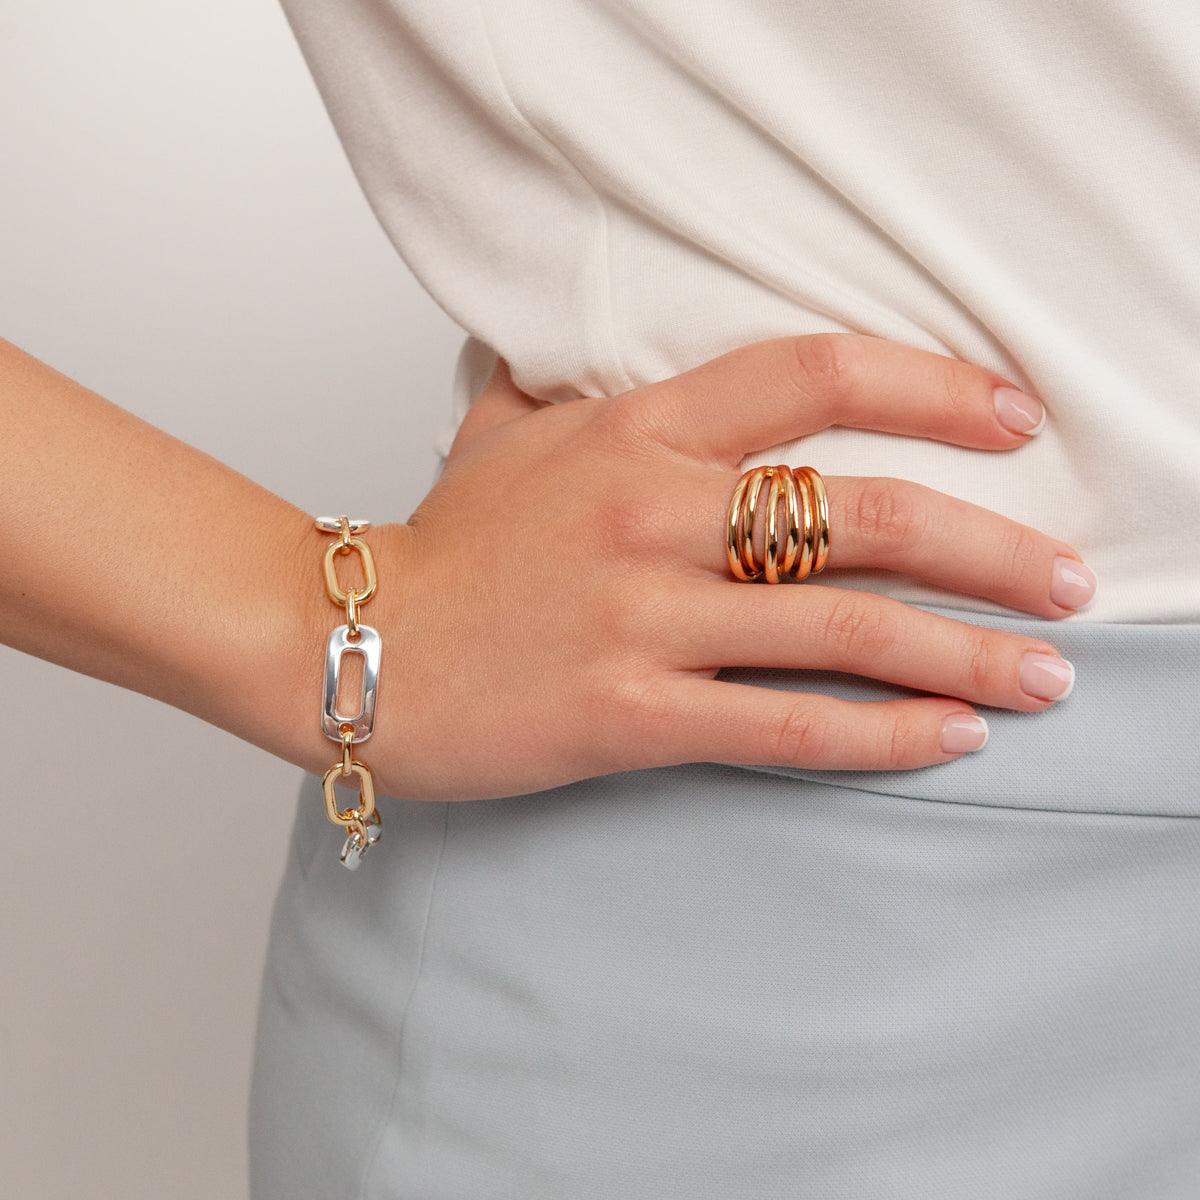 Model wearing Geo Silver and Gold T-Bar Contemporary Bracelet